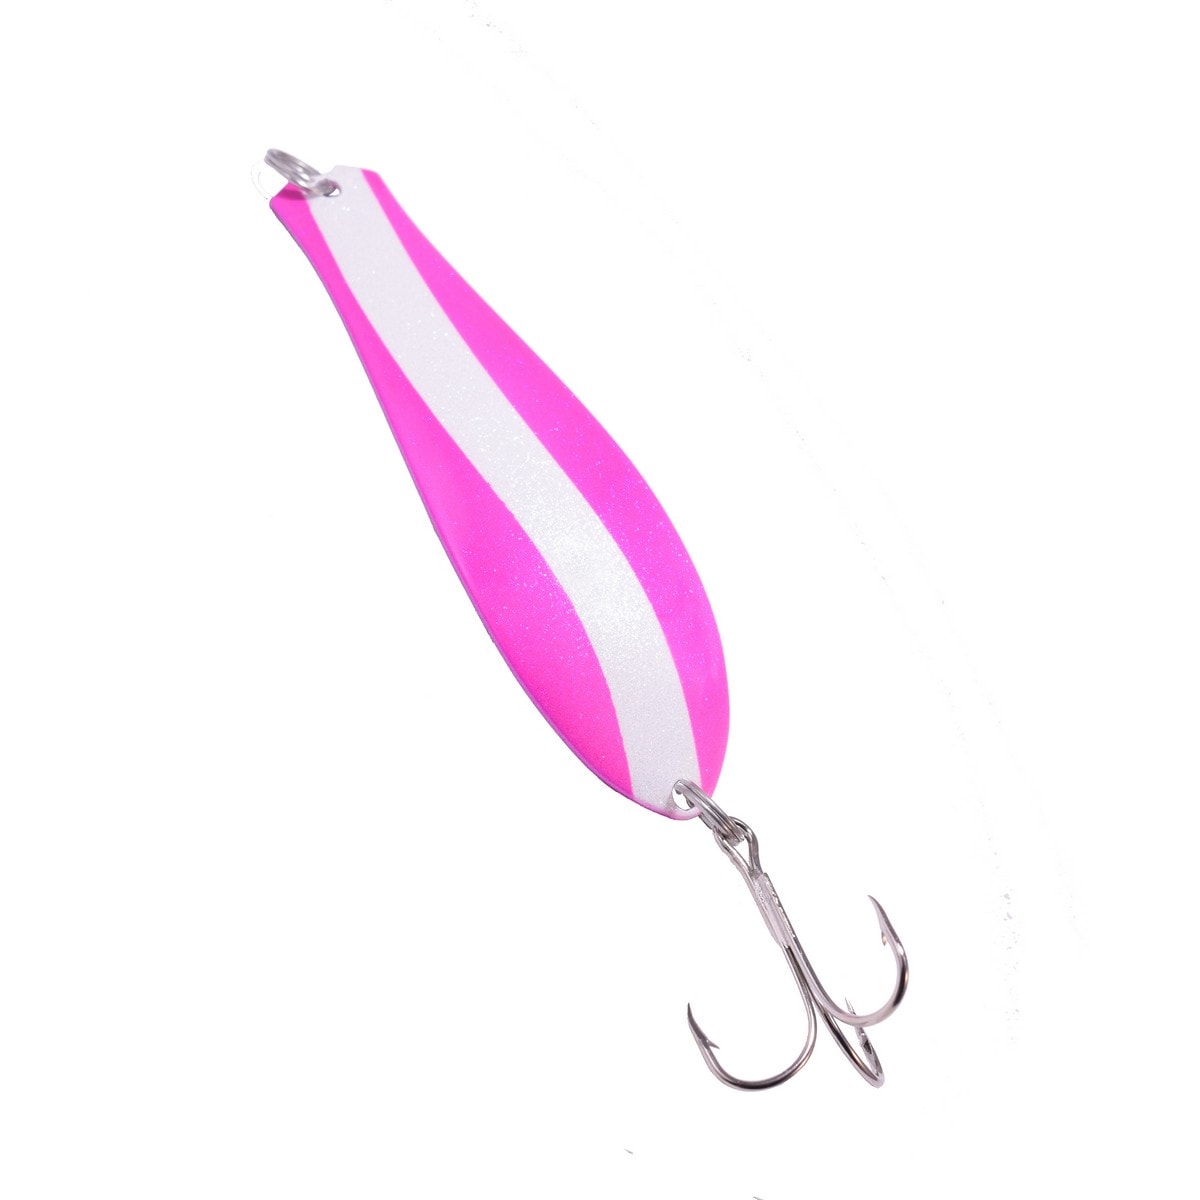 Doctor Spoon in (38) Pink / White Swirl - Yellow Bird Fishing Products